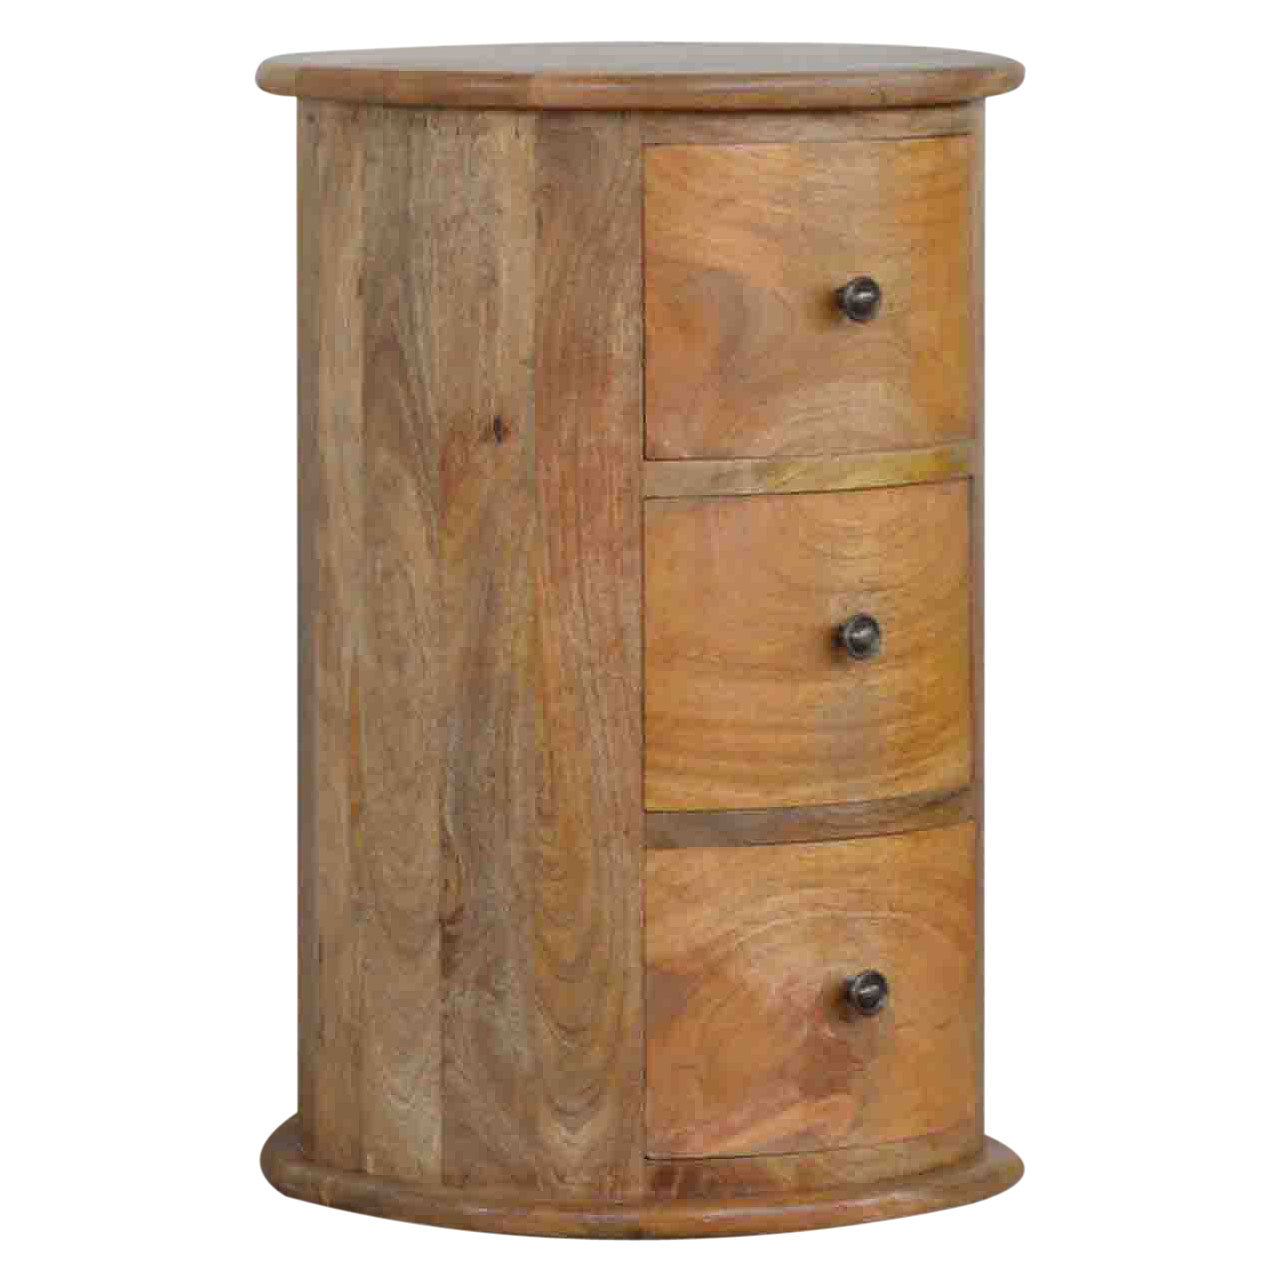 3 Drawer Mango Wood Drum Chest Bedside Drawers